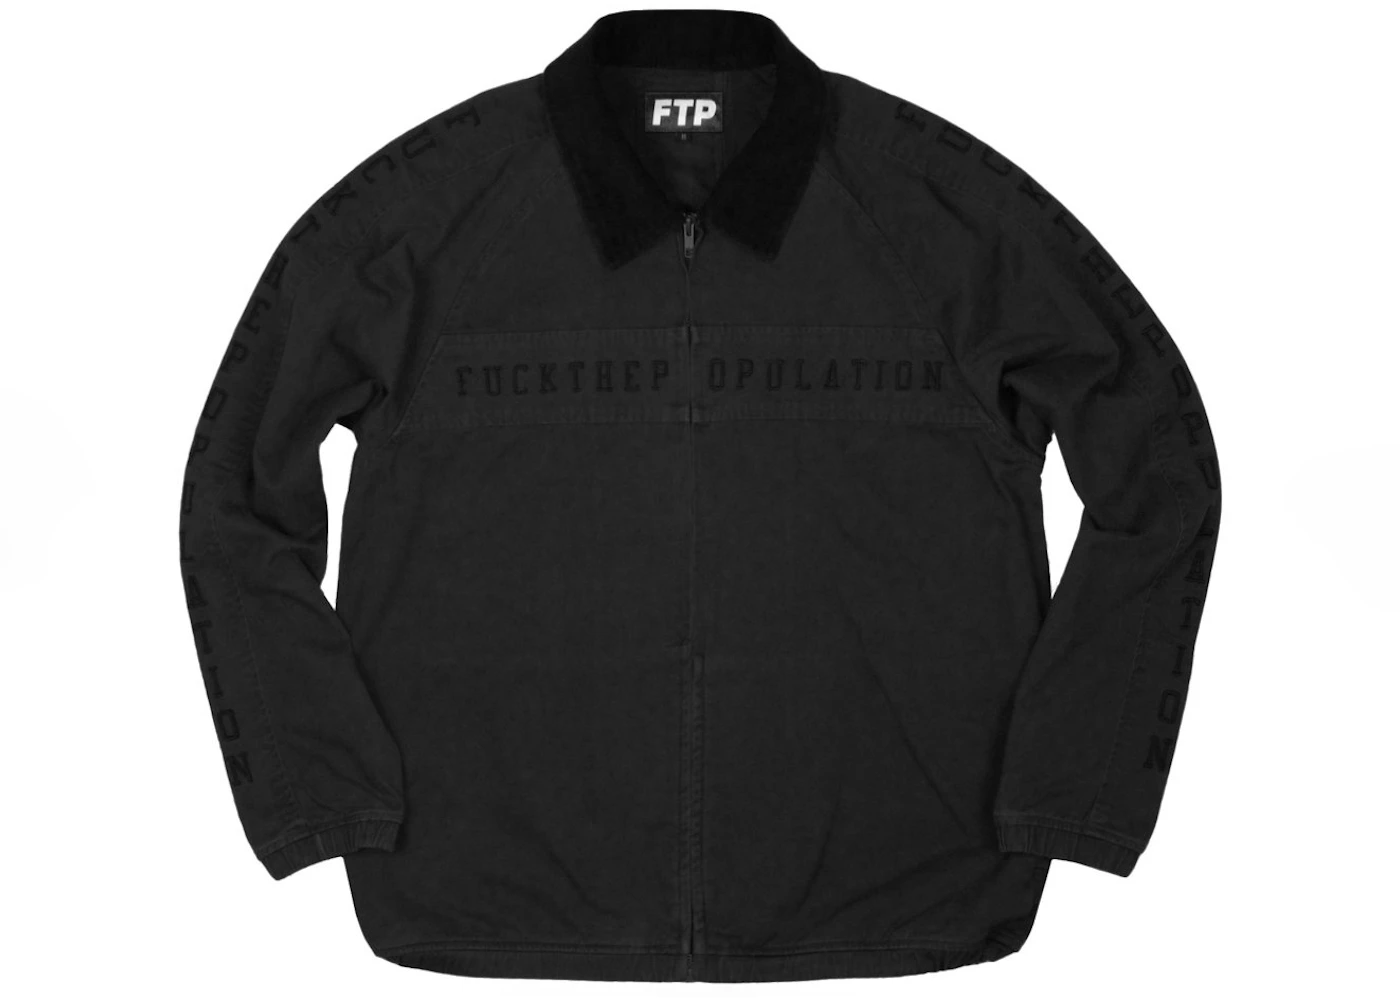 FTP Spell Out Work Jacket Black Men's - SS21 - US